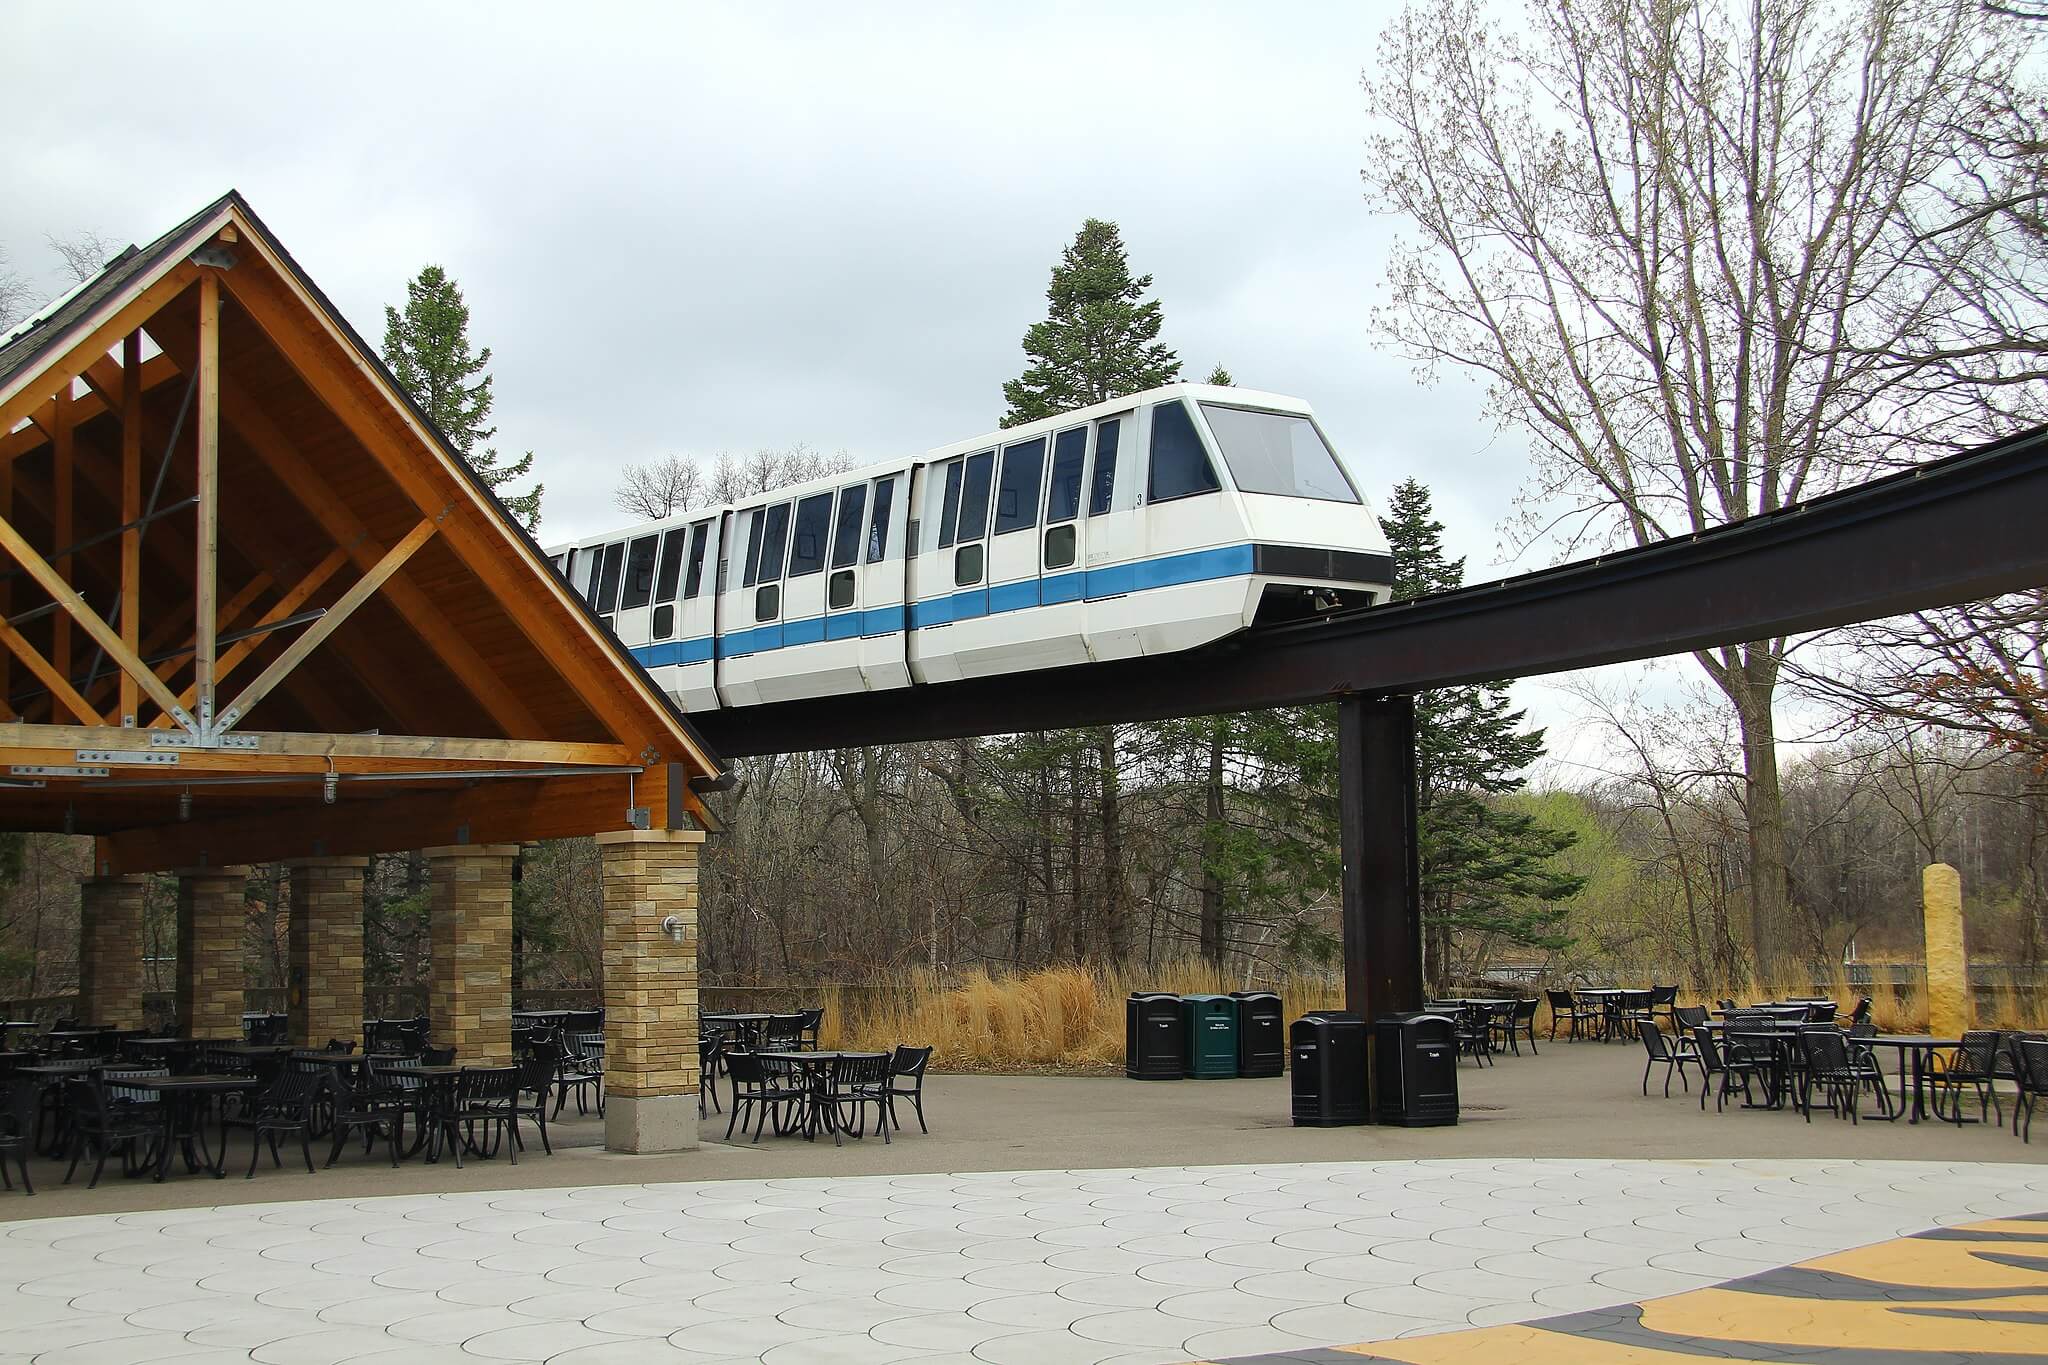 photo of a monorail system